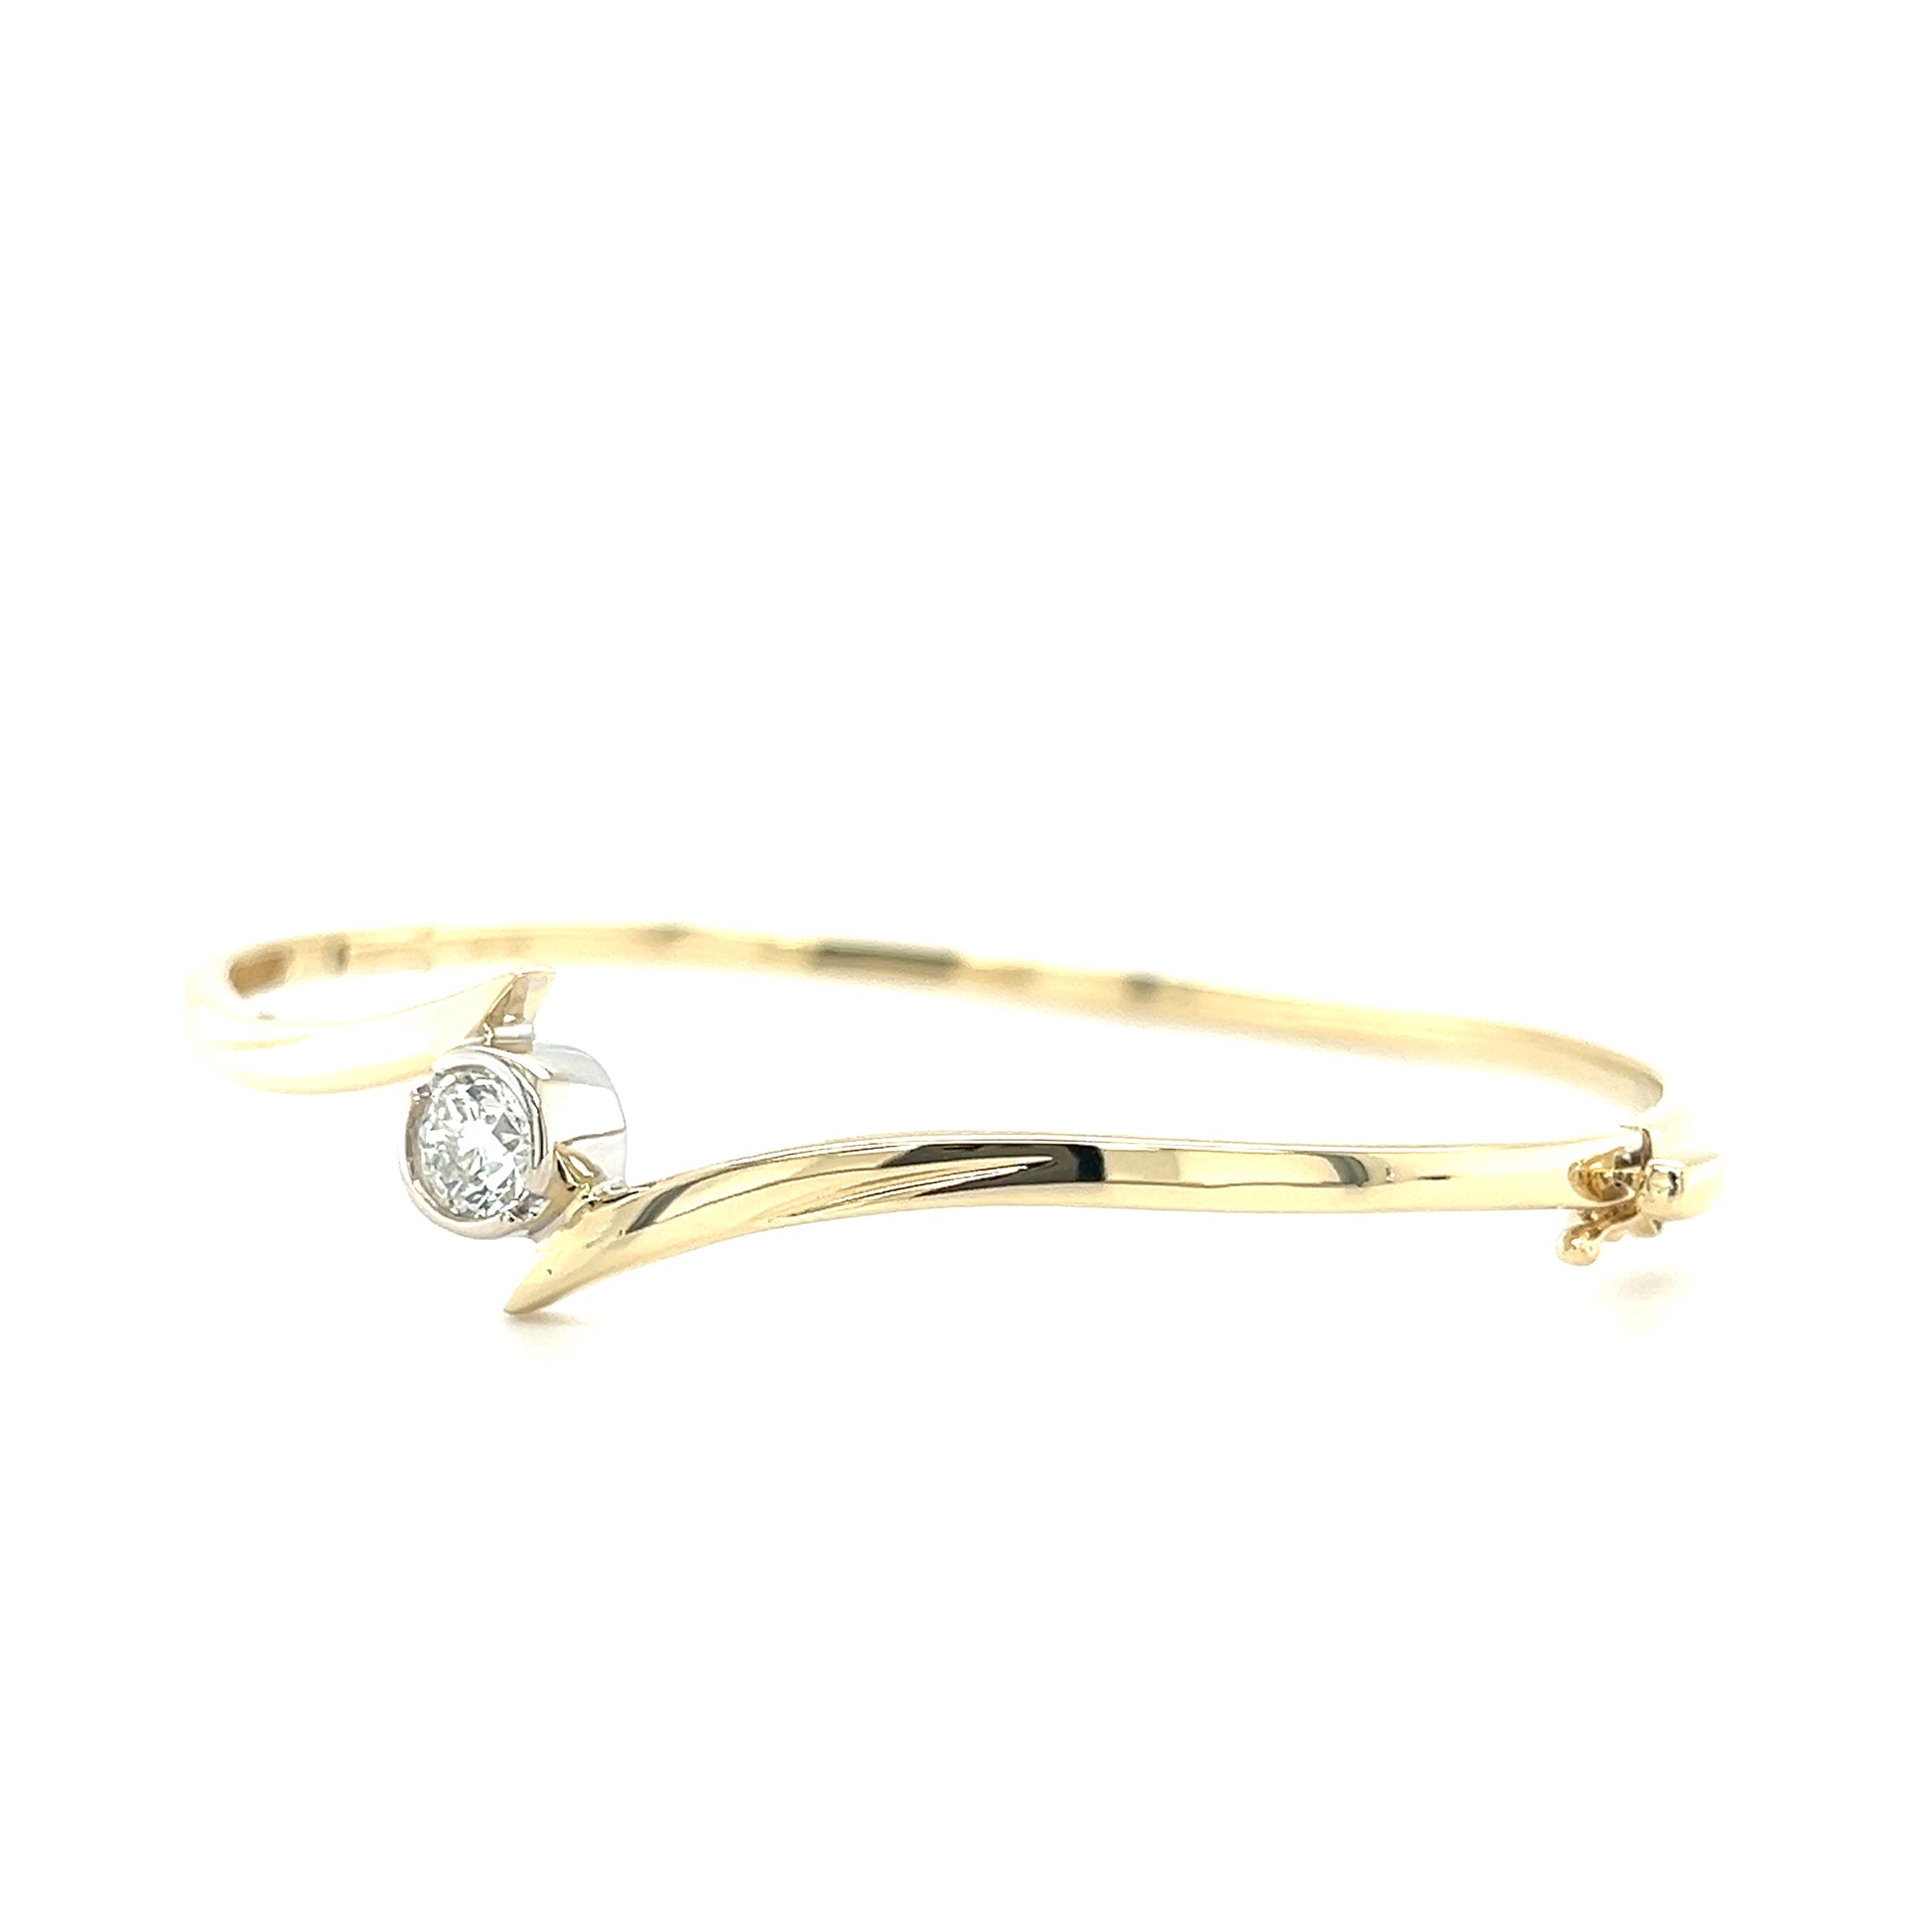 Solid Bypass Bangle Bracelet with 0.5ct of Diamonds in 14K Yellow and White Gold Right Side View